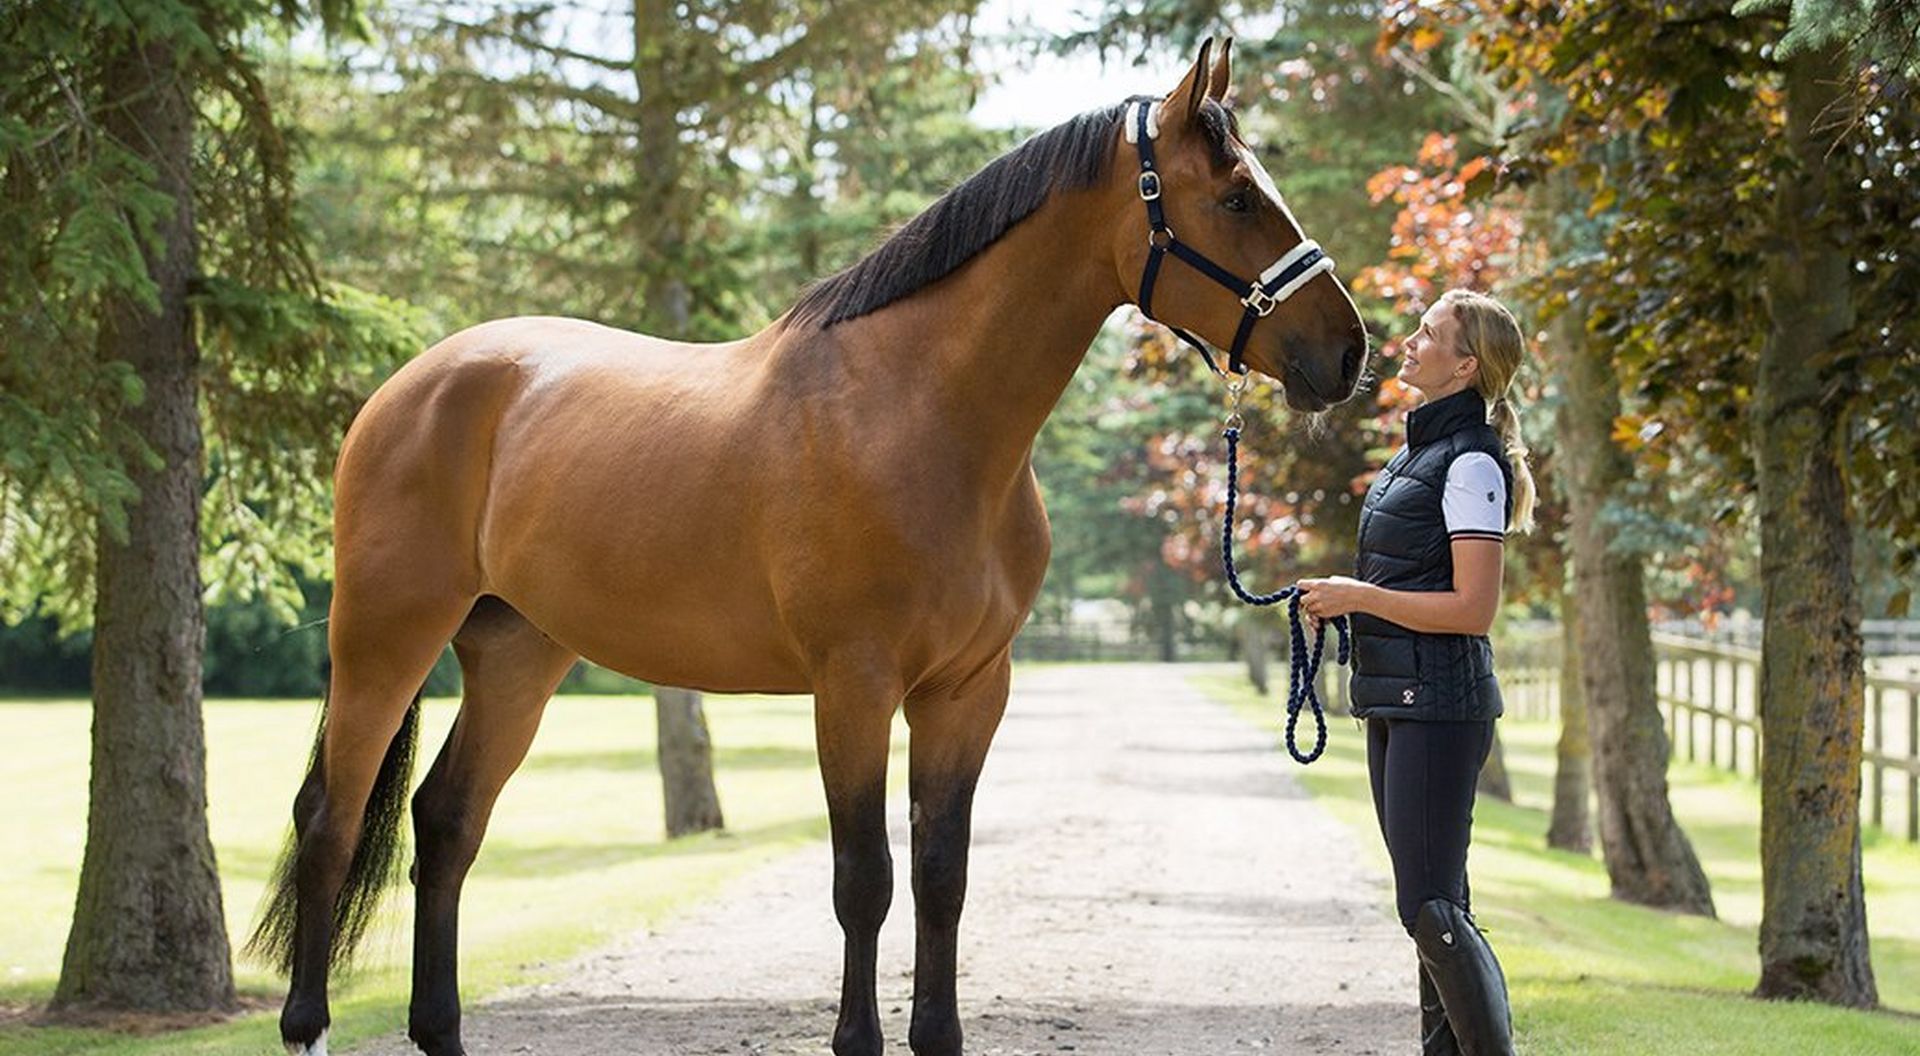 Questions To Ask When Buying A Horse